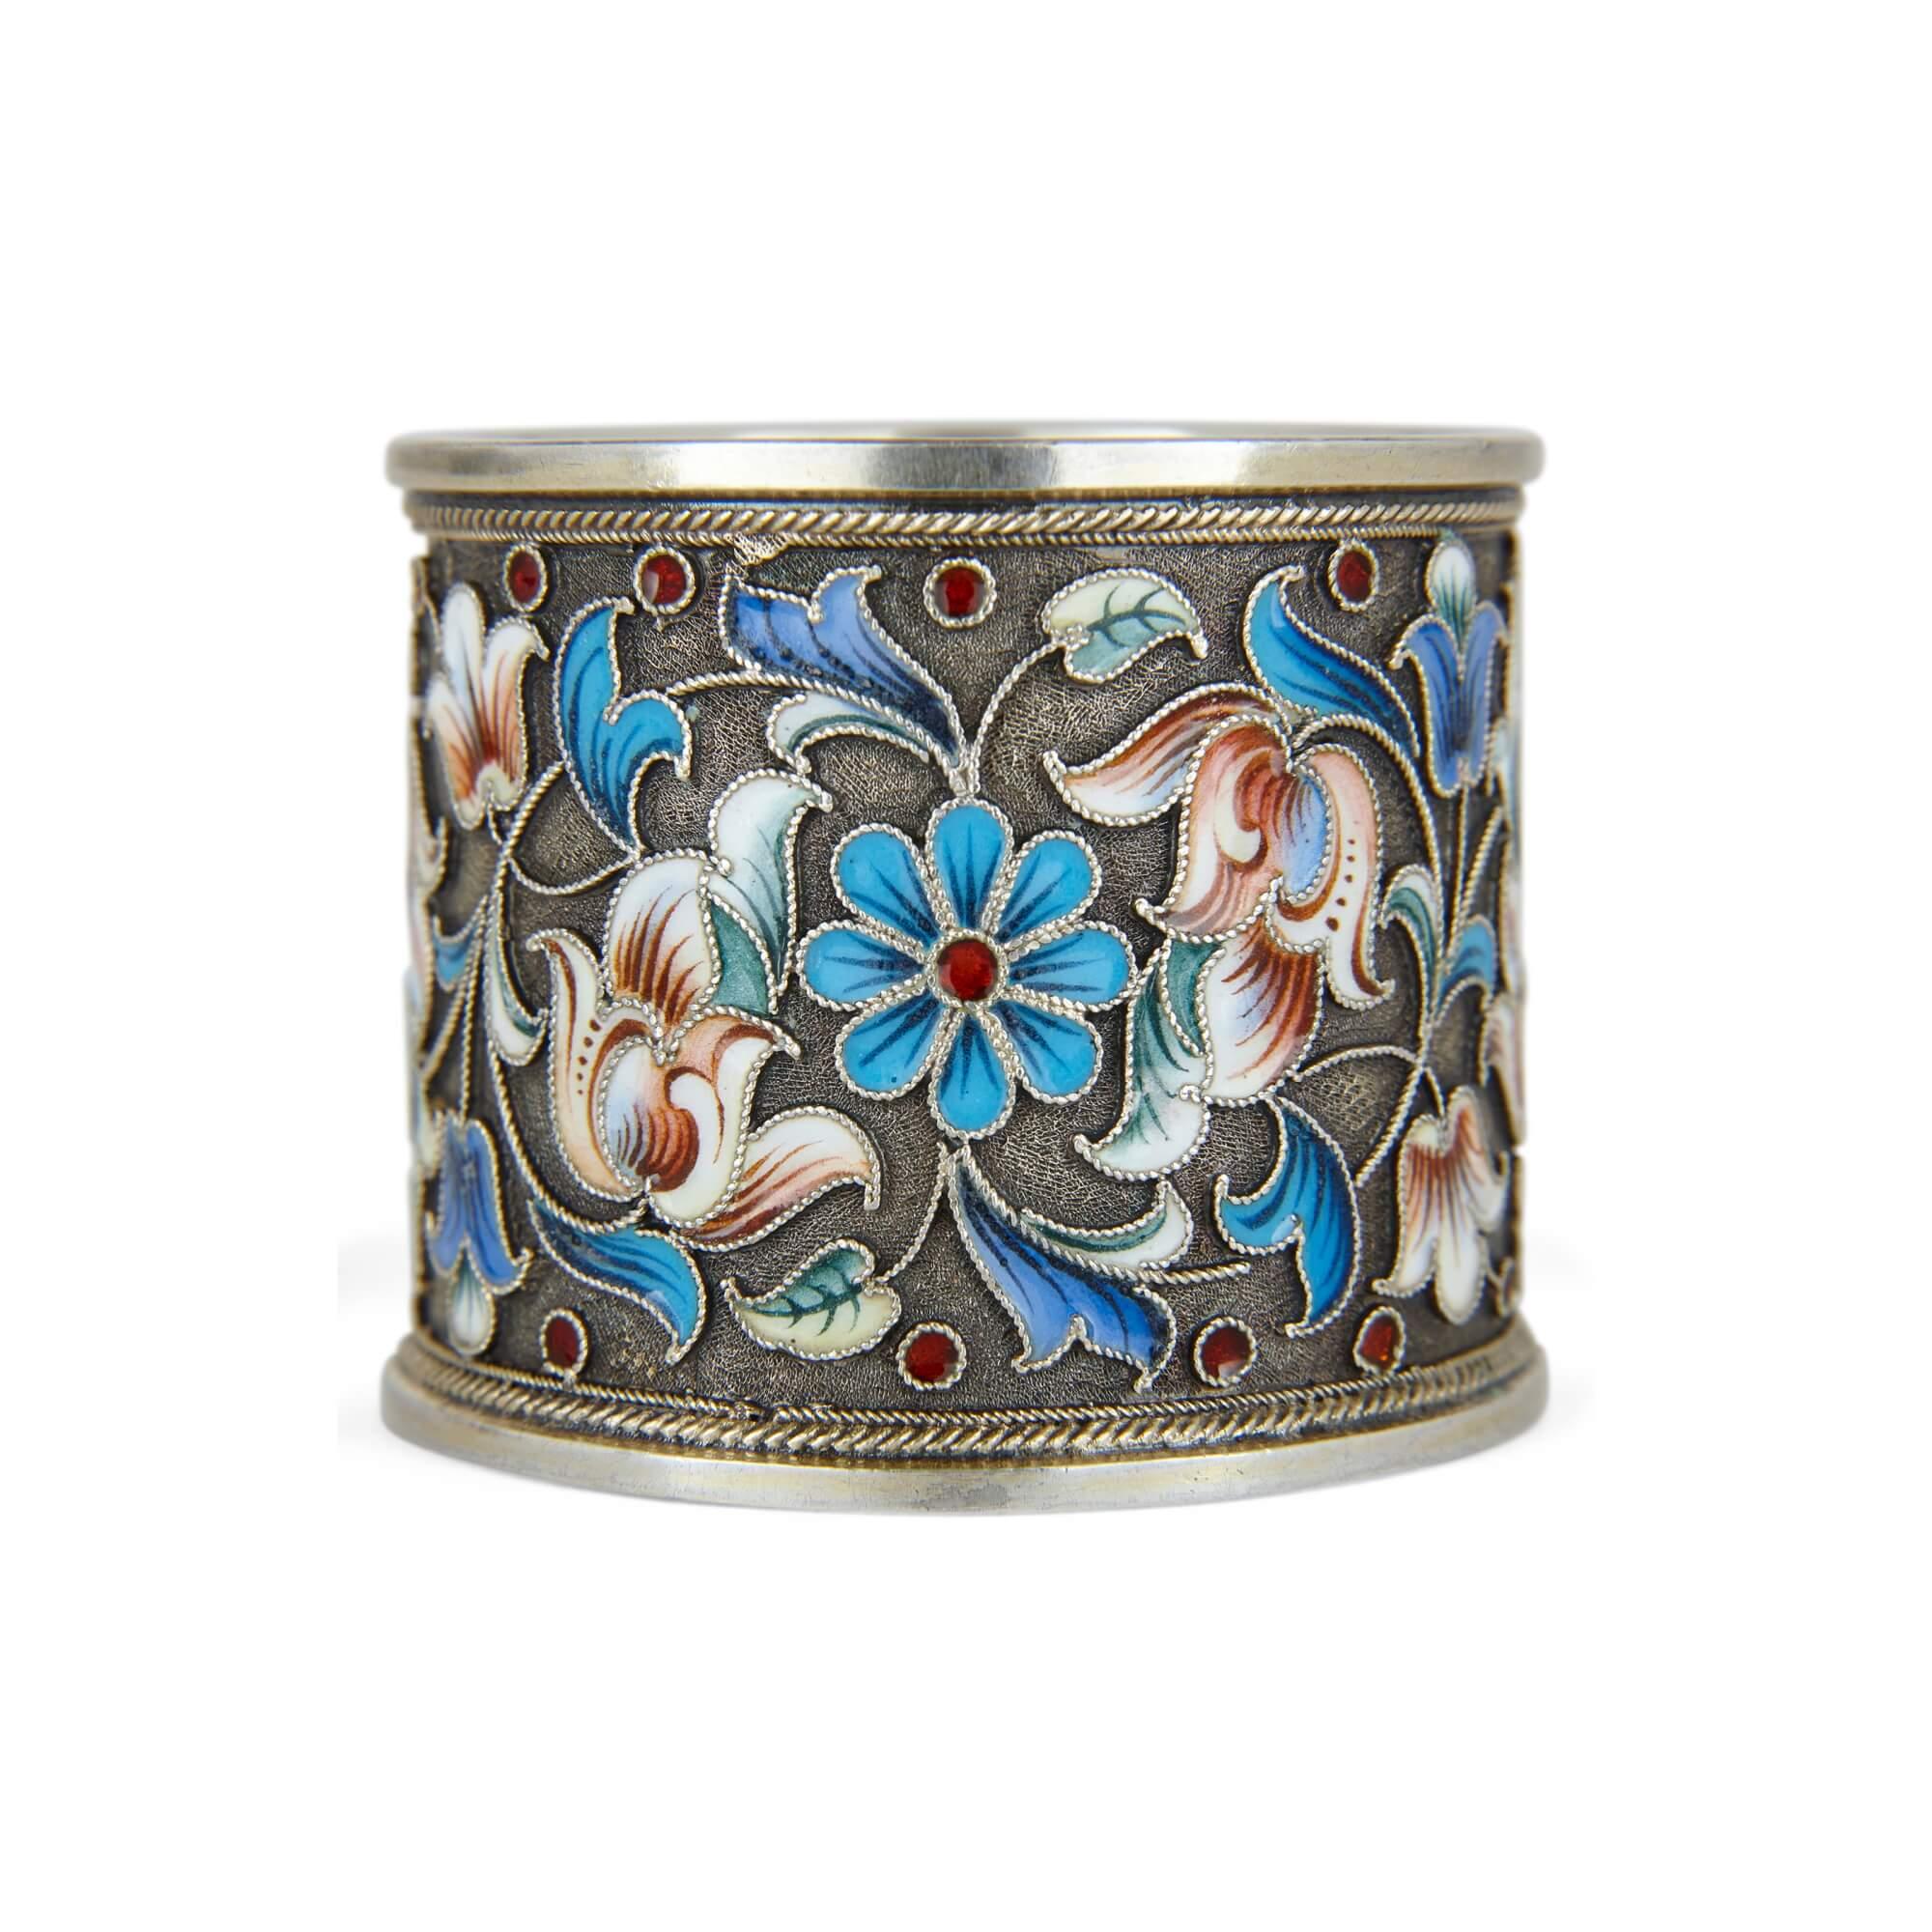 A silver-gilt and cloisonné-enamel Russian napkin ring 
Moscow, early 20th century
Measures: Height 4cm, diameter 5cm

This delightful item is a Russian napkin ring, crafted from silver-gilt and cloisonné-enamel, a typical combination, and was